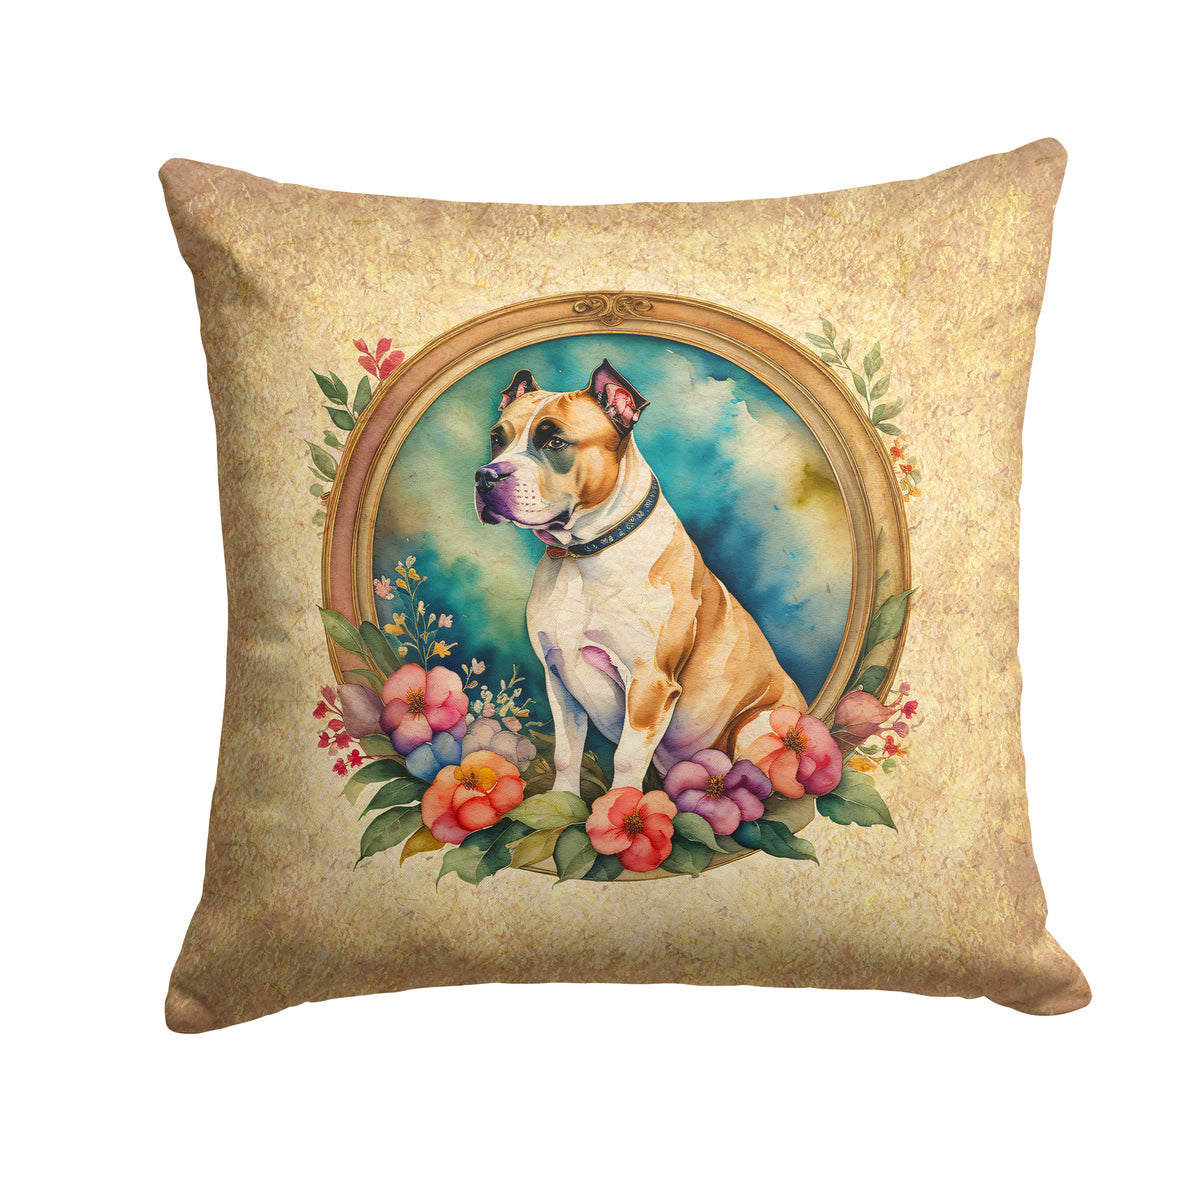 Buy this American Staffordshire Terrier and Flowers Fabric Decorative Pillow